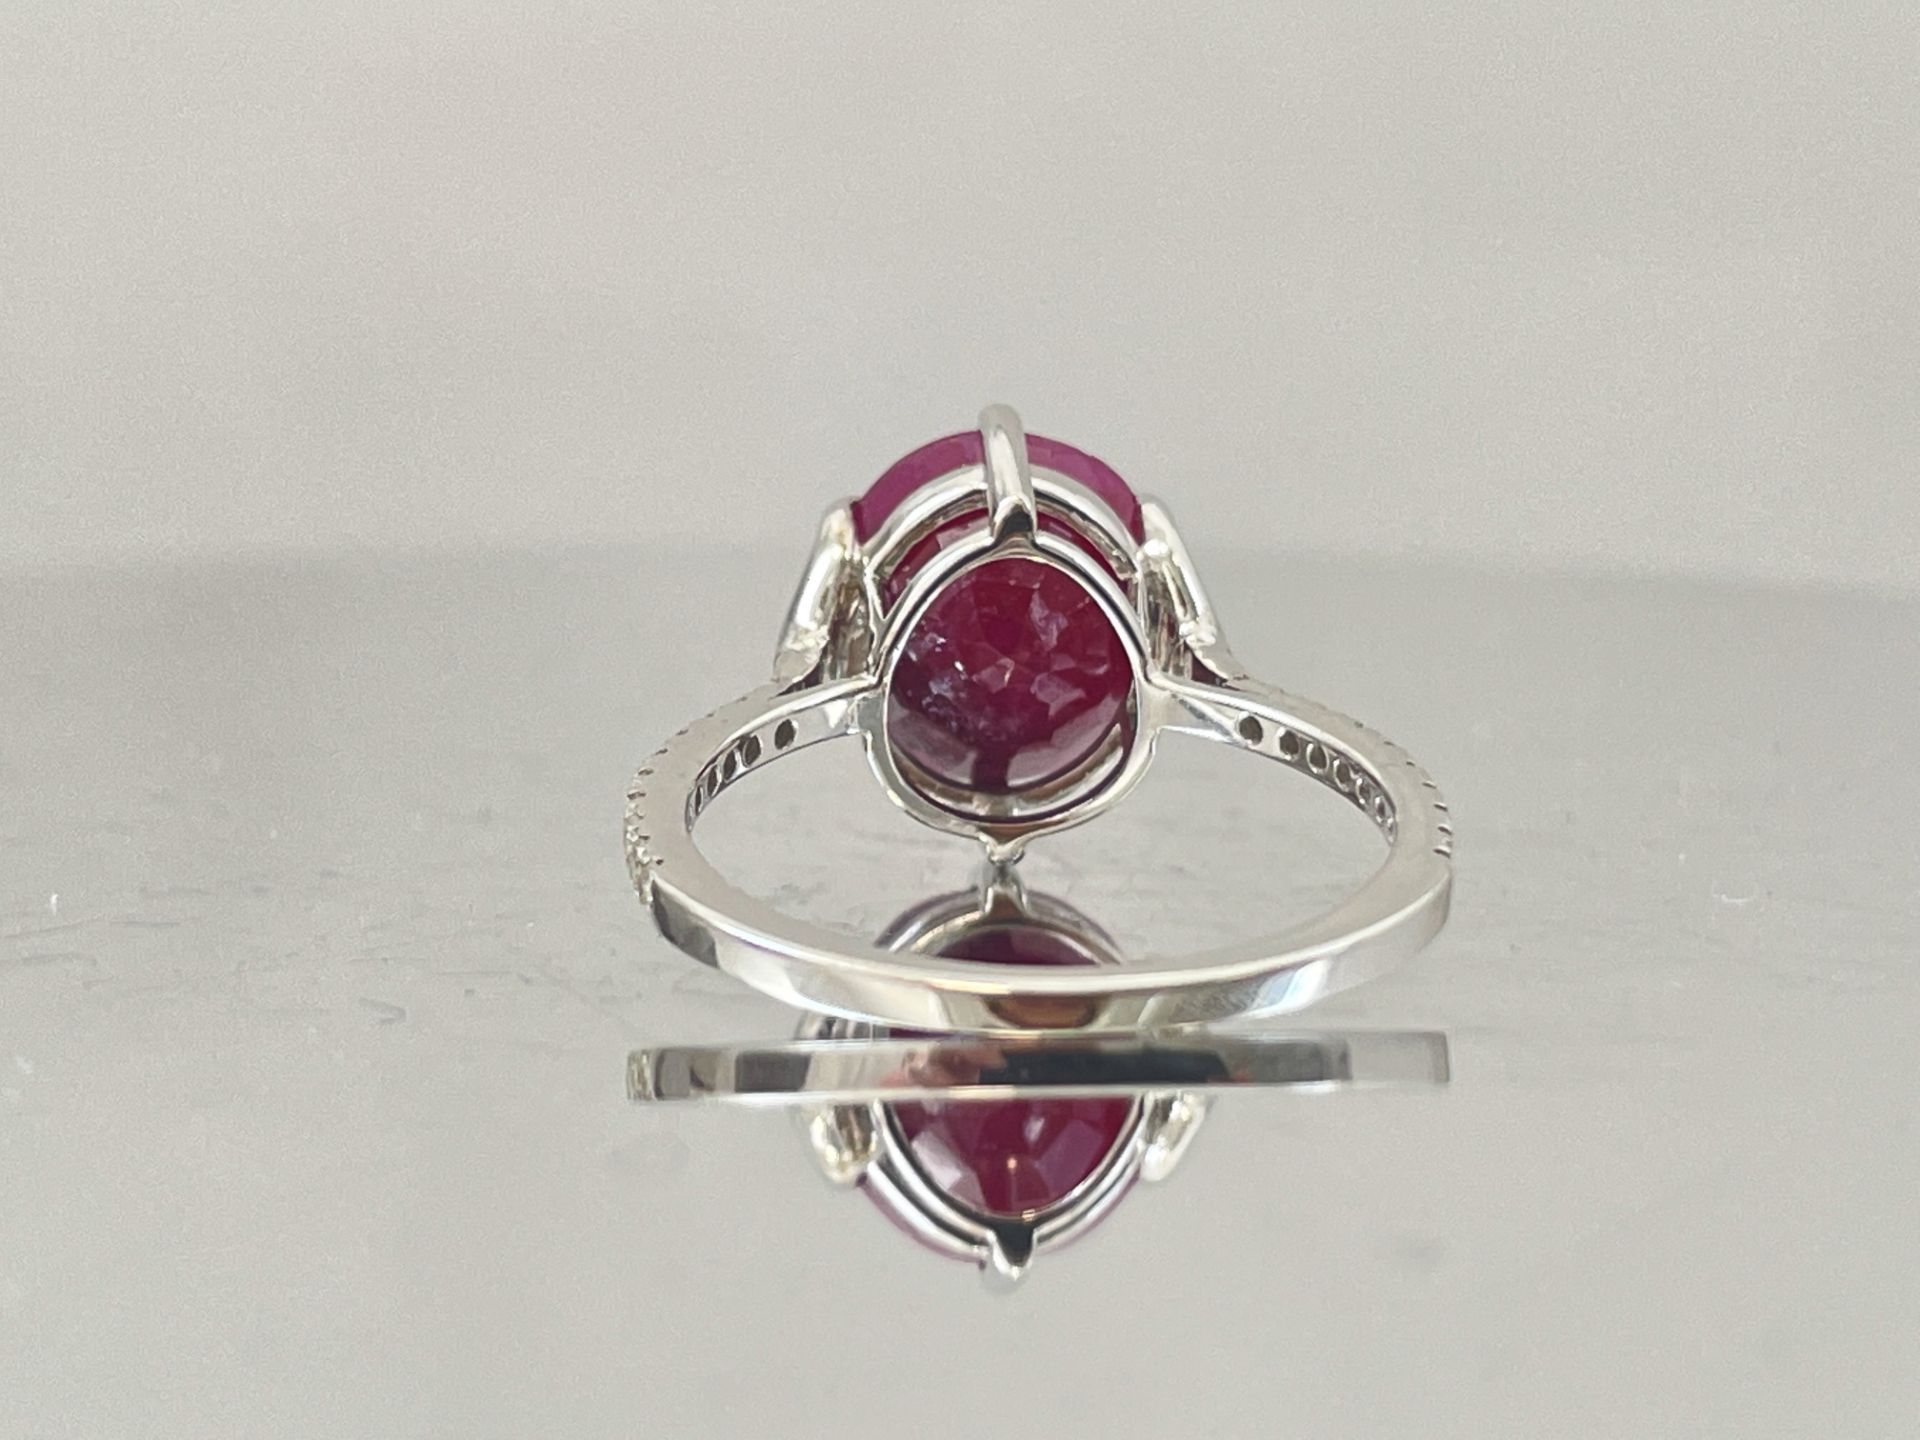 Natural Burma RubyUnheated/Untreated 6.19 Ct With Natural Diamonds & 18kGold - Image 4 of 5